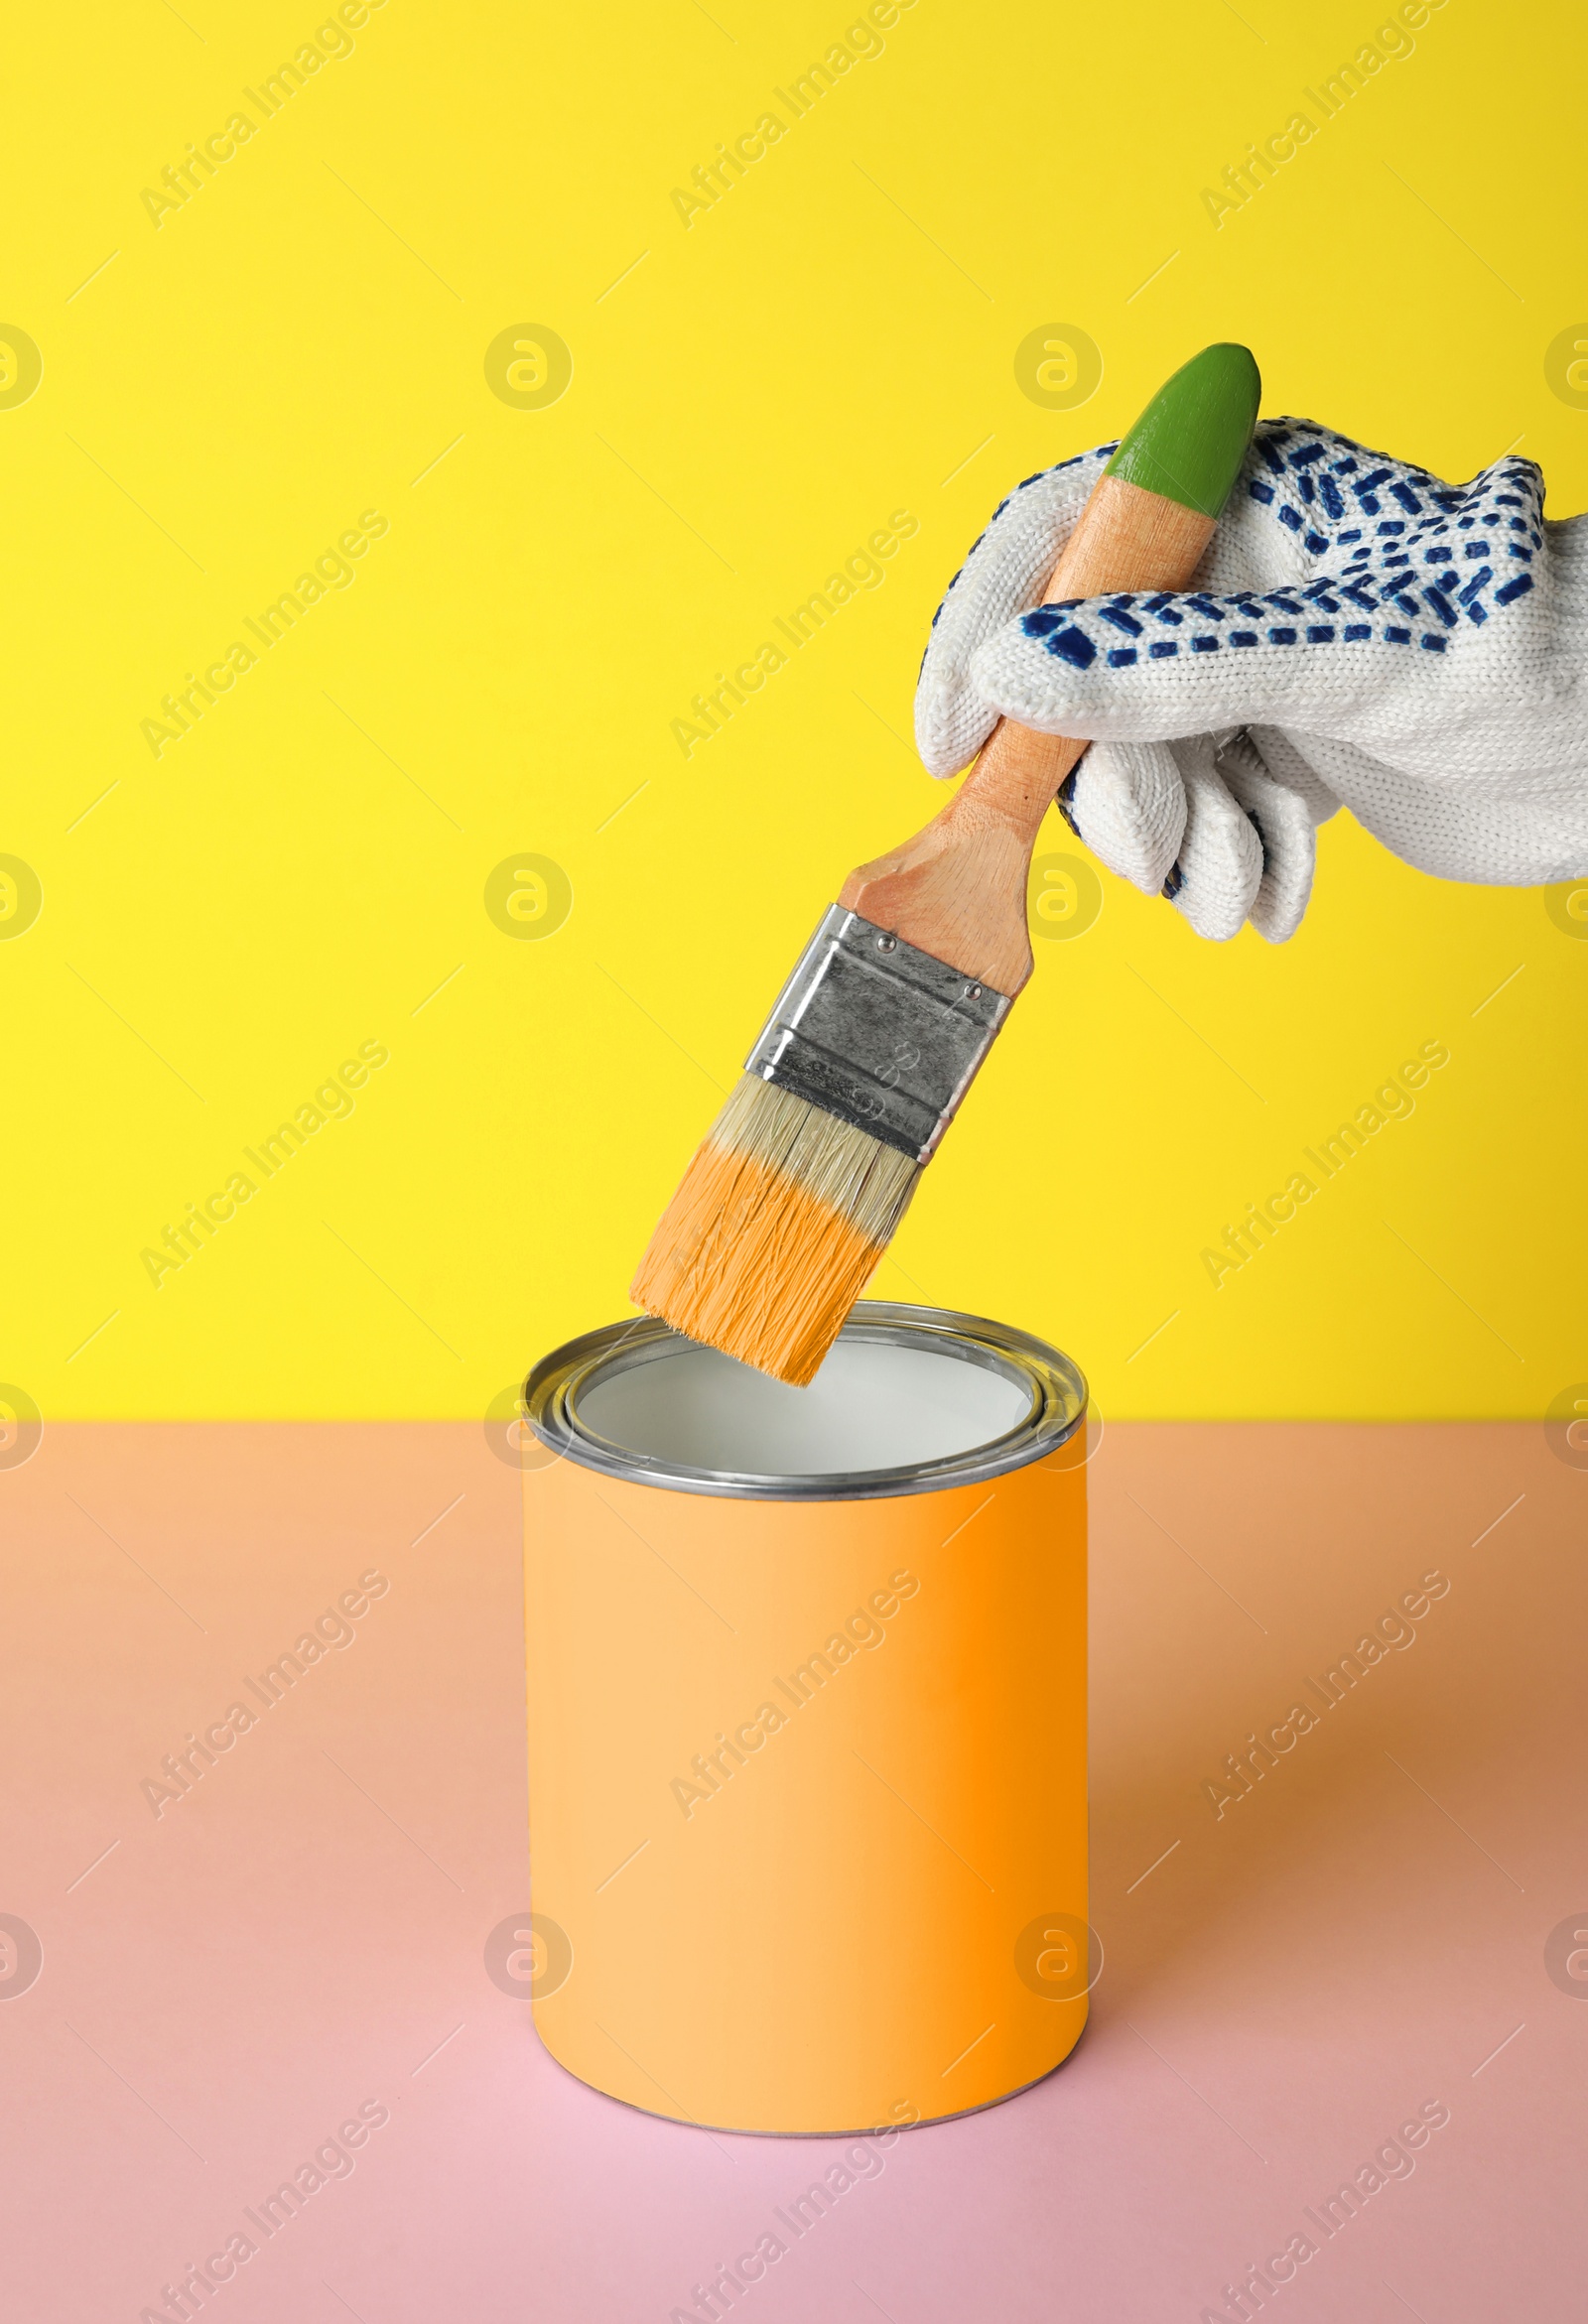 Photo of Person dipping brush into can of orange paint on pink table against yellow background, closeup. Mockup for design